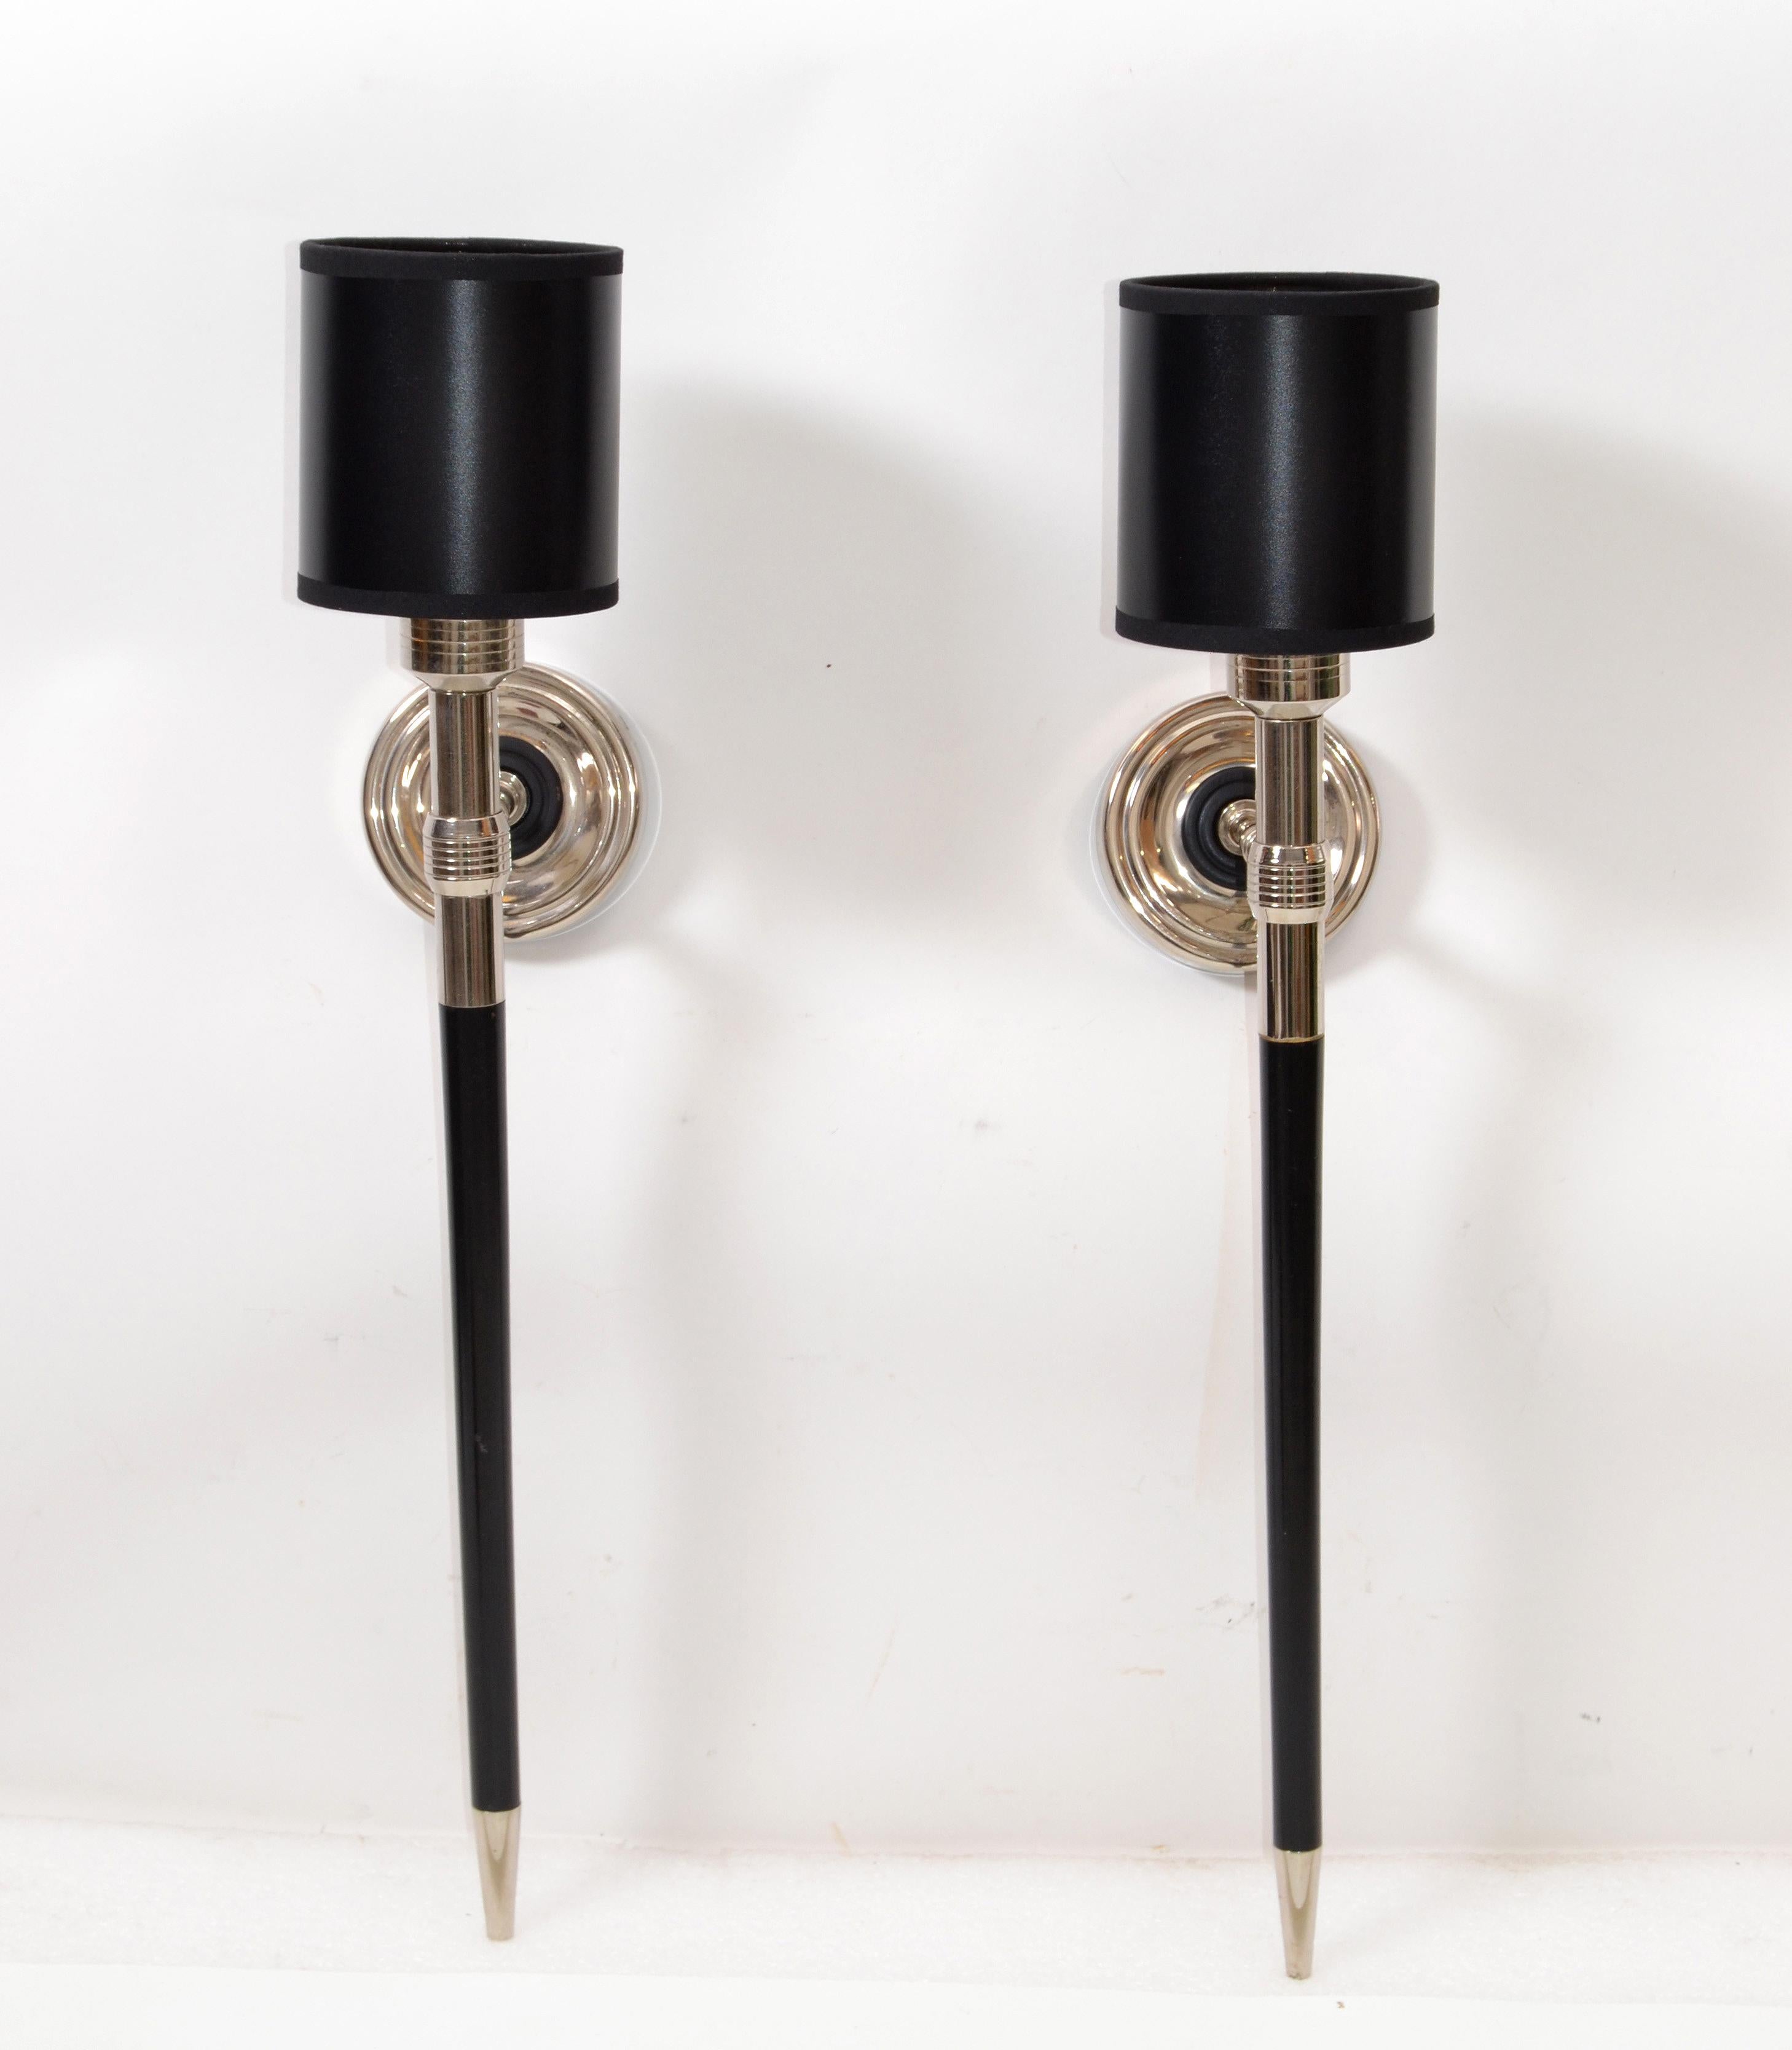 Very elegant pair of circa 1960 chrome and black wood sconces for Maison Lancel, France.
Wired for US and in working condition. Each wall sconce takes 1-light bulb with max. 40 watts.
Back plate: 3.75 inches diameter
Junction Box Covers in 5